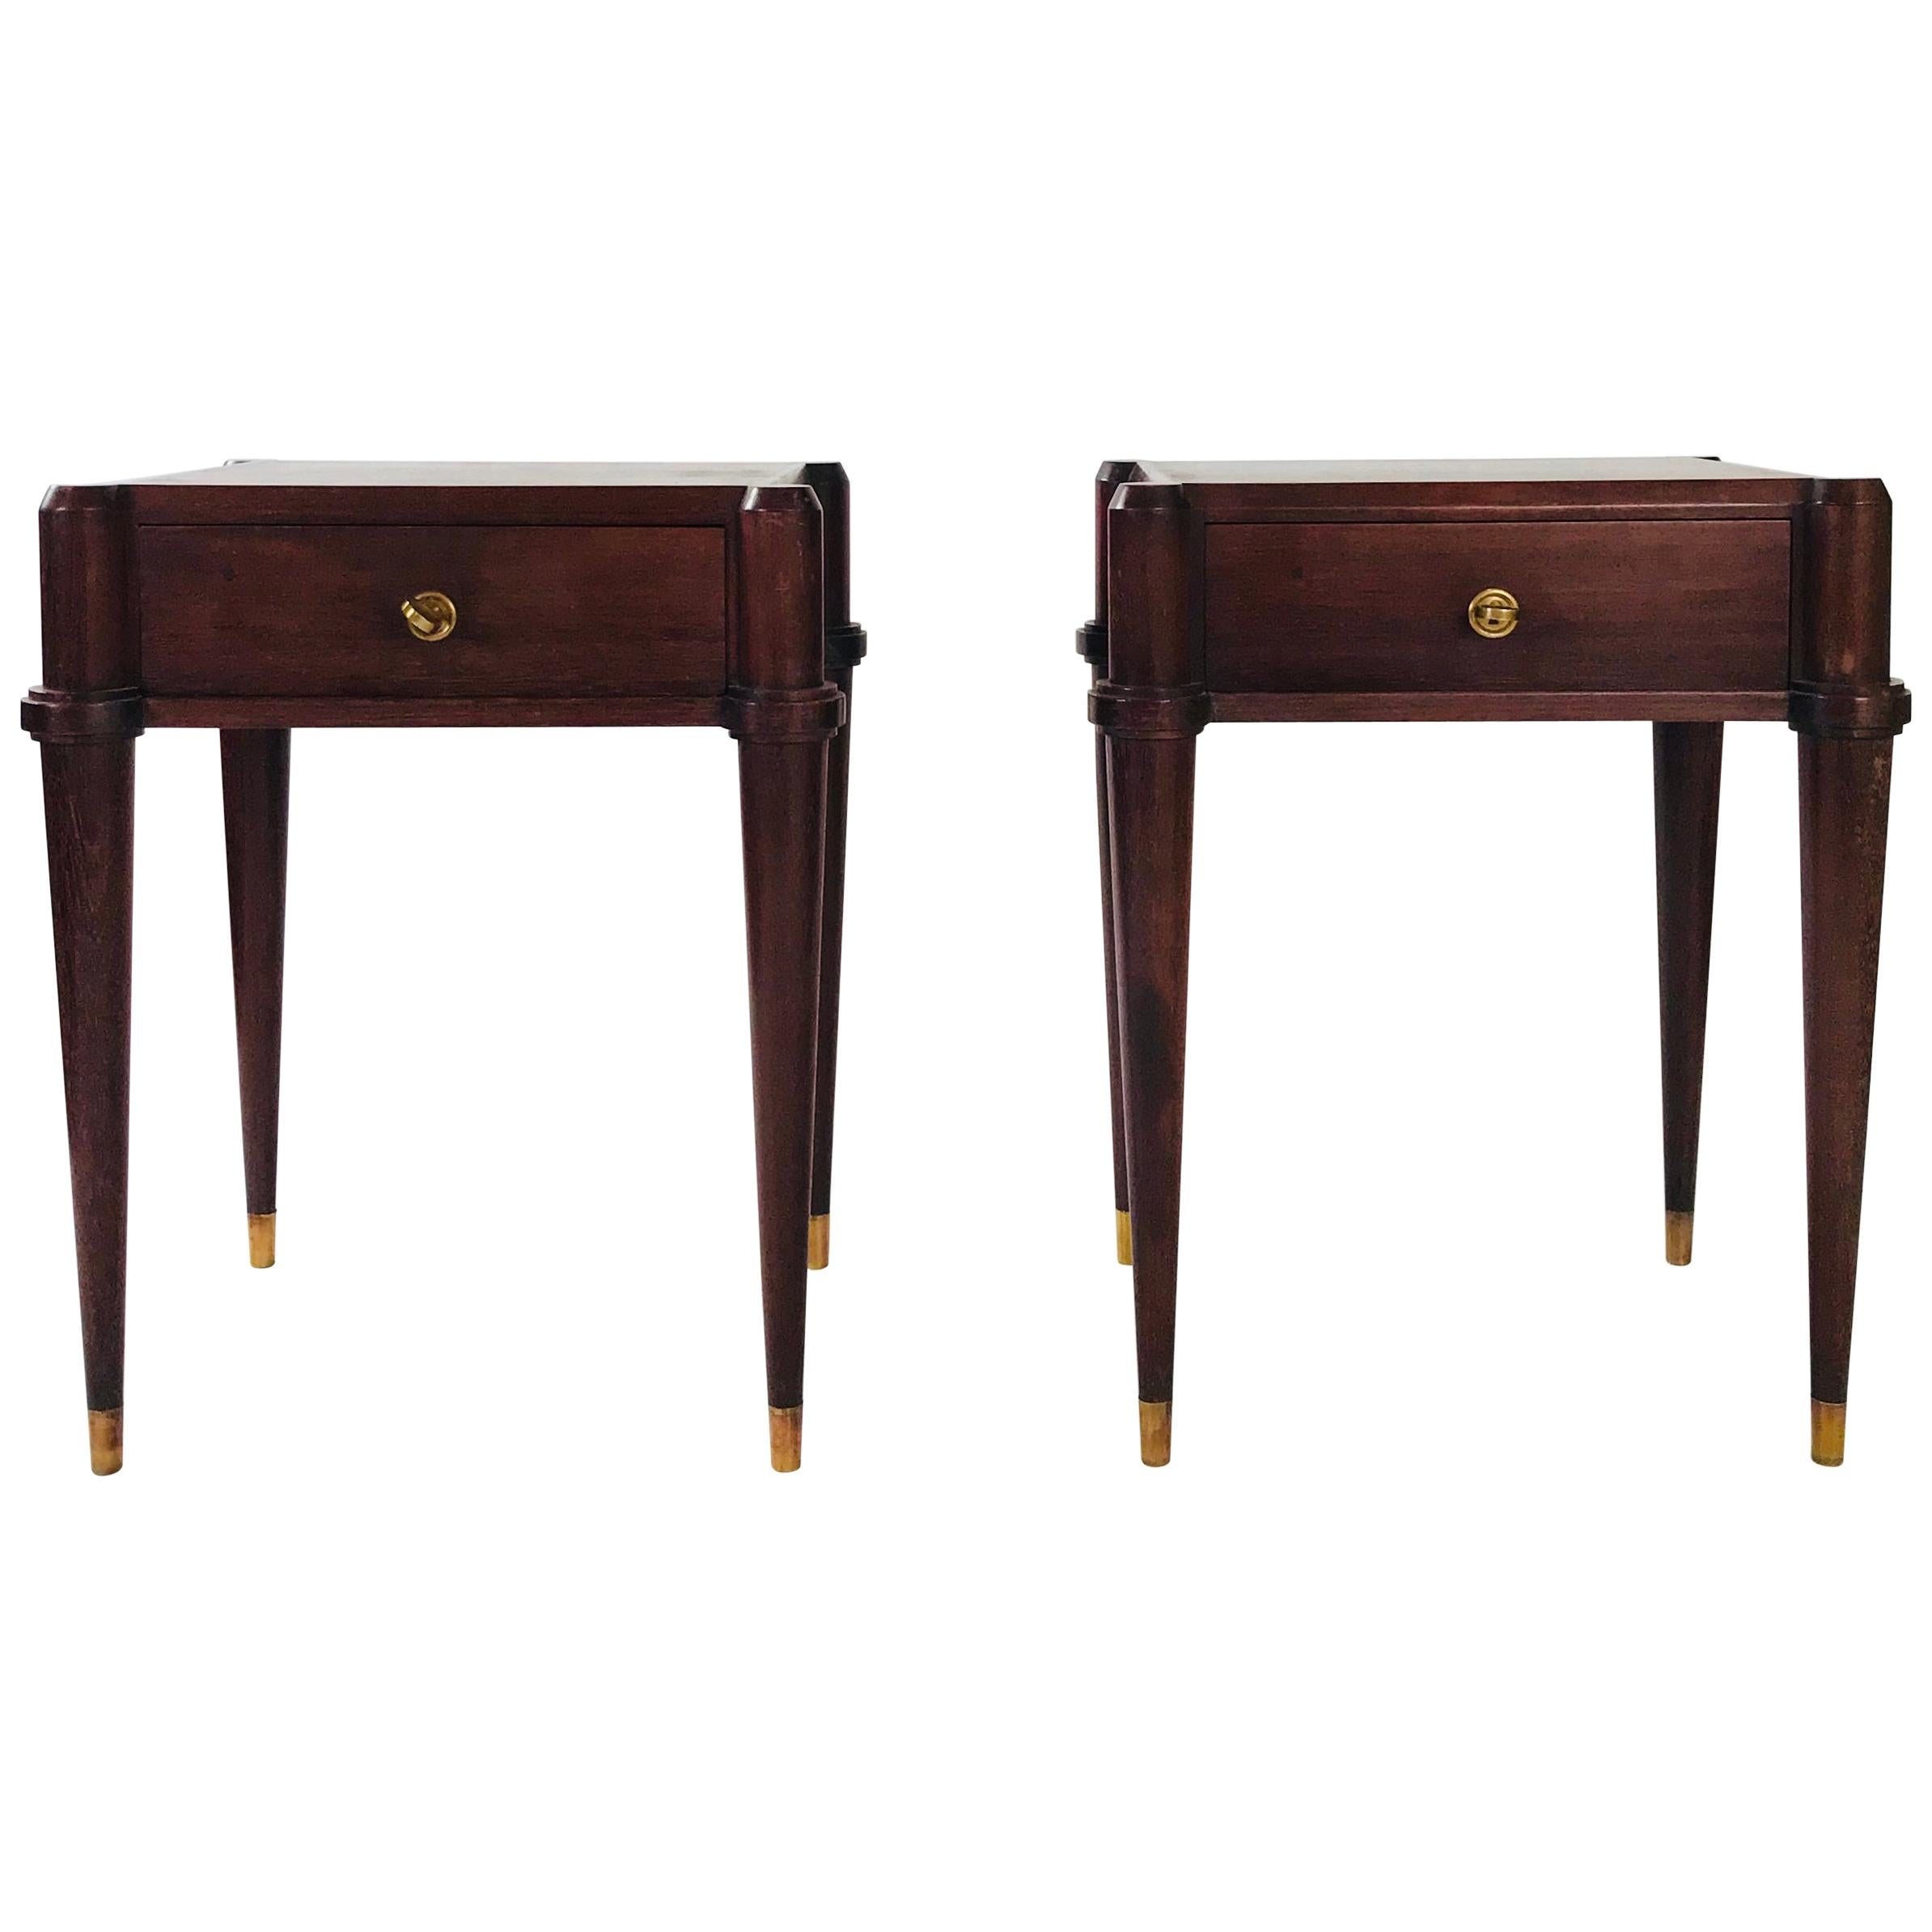 Superb French Solid Mahogany Bedside Tables